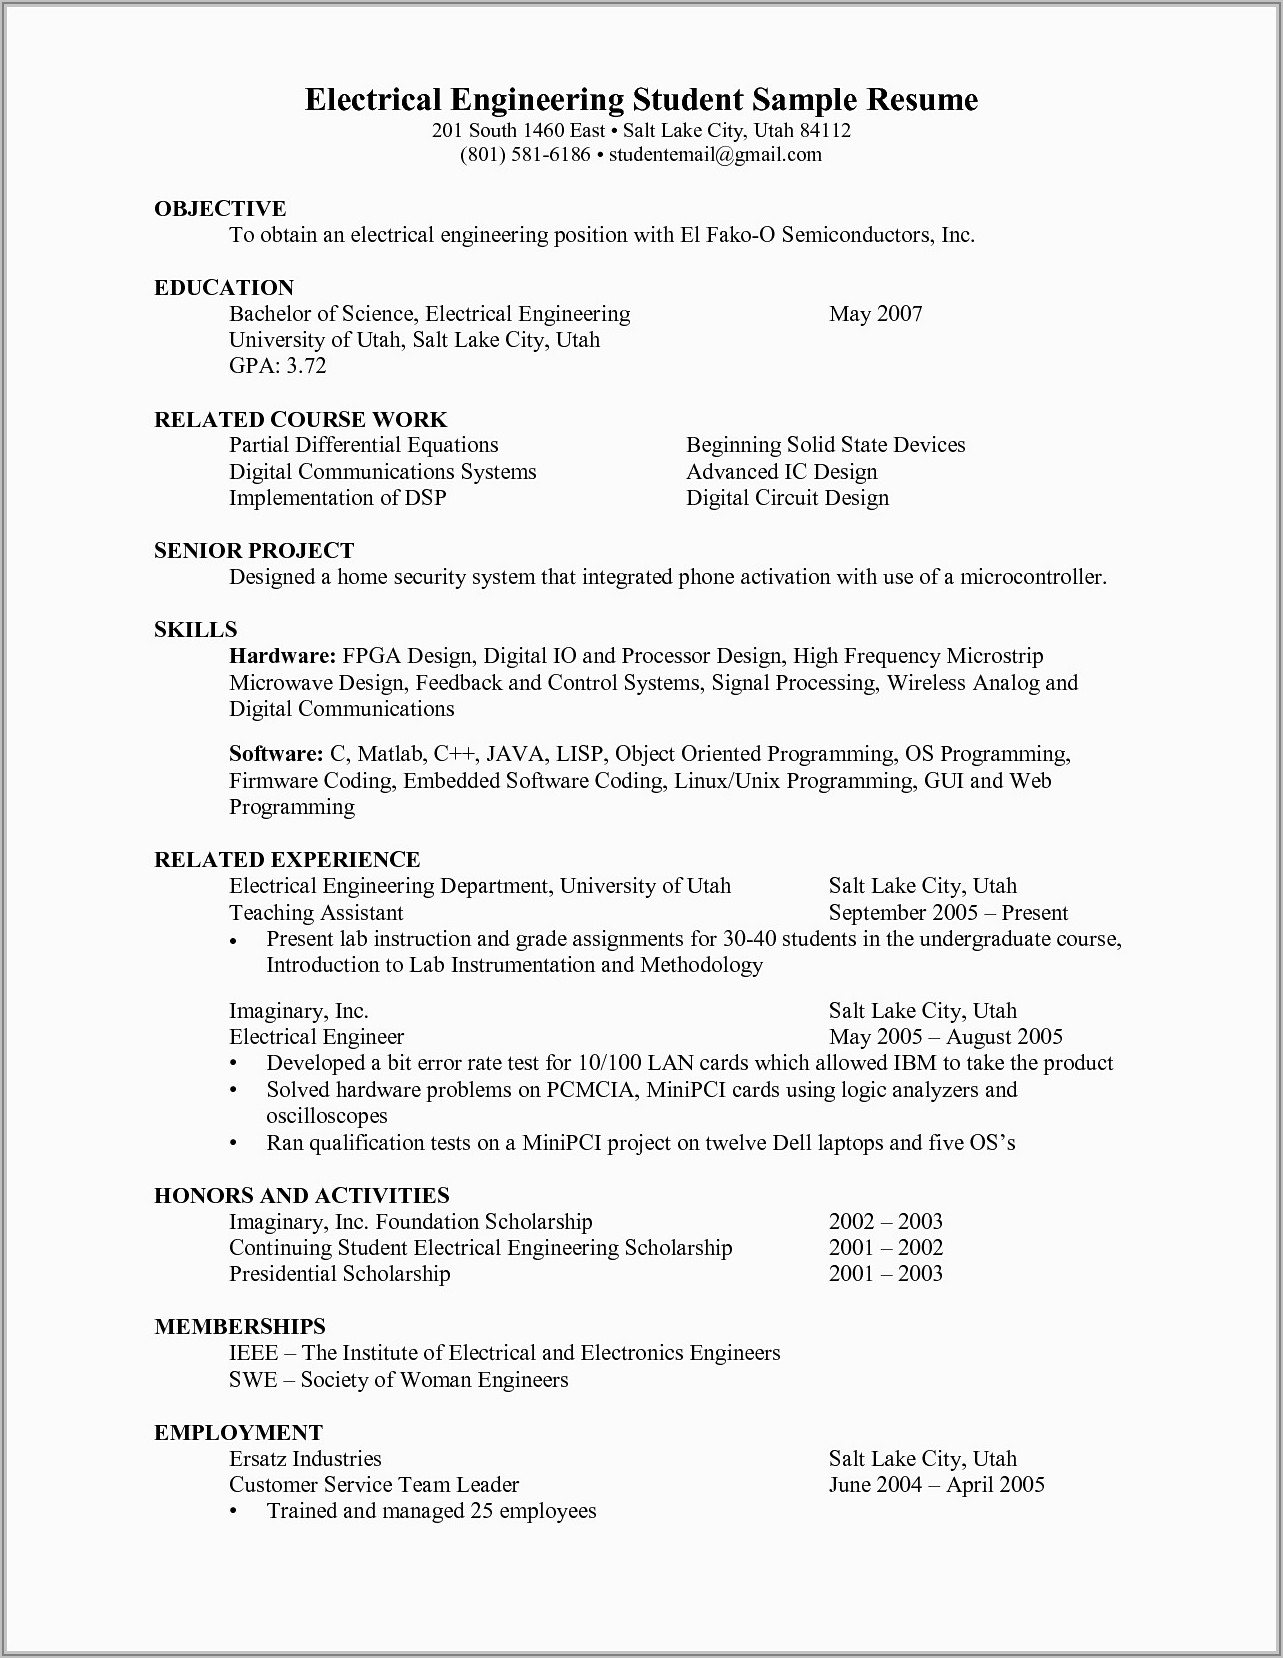 Resume Objective Samples For Electrical Engineer